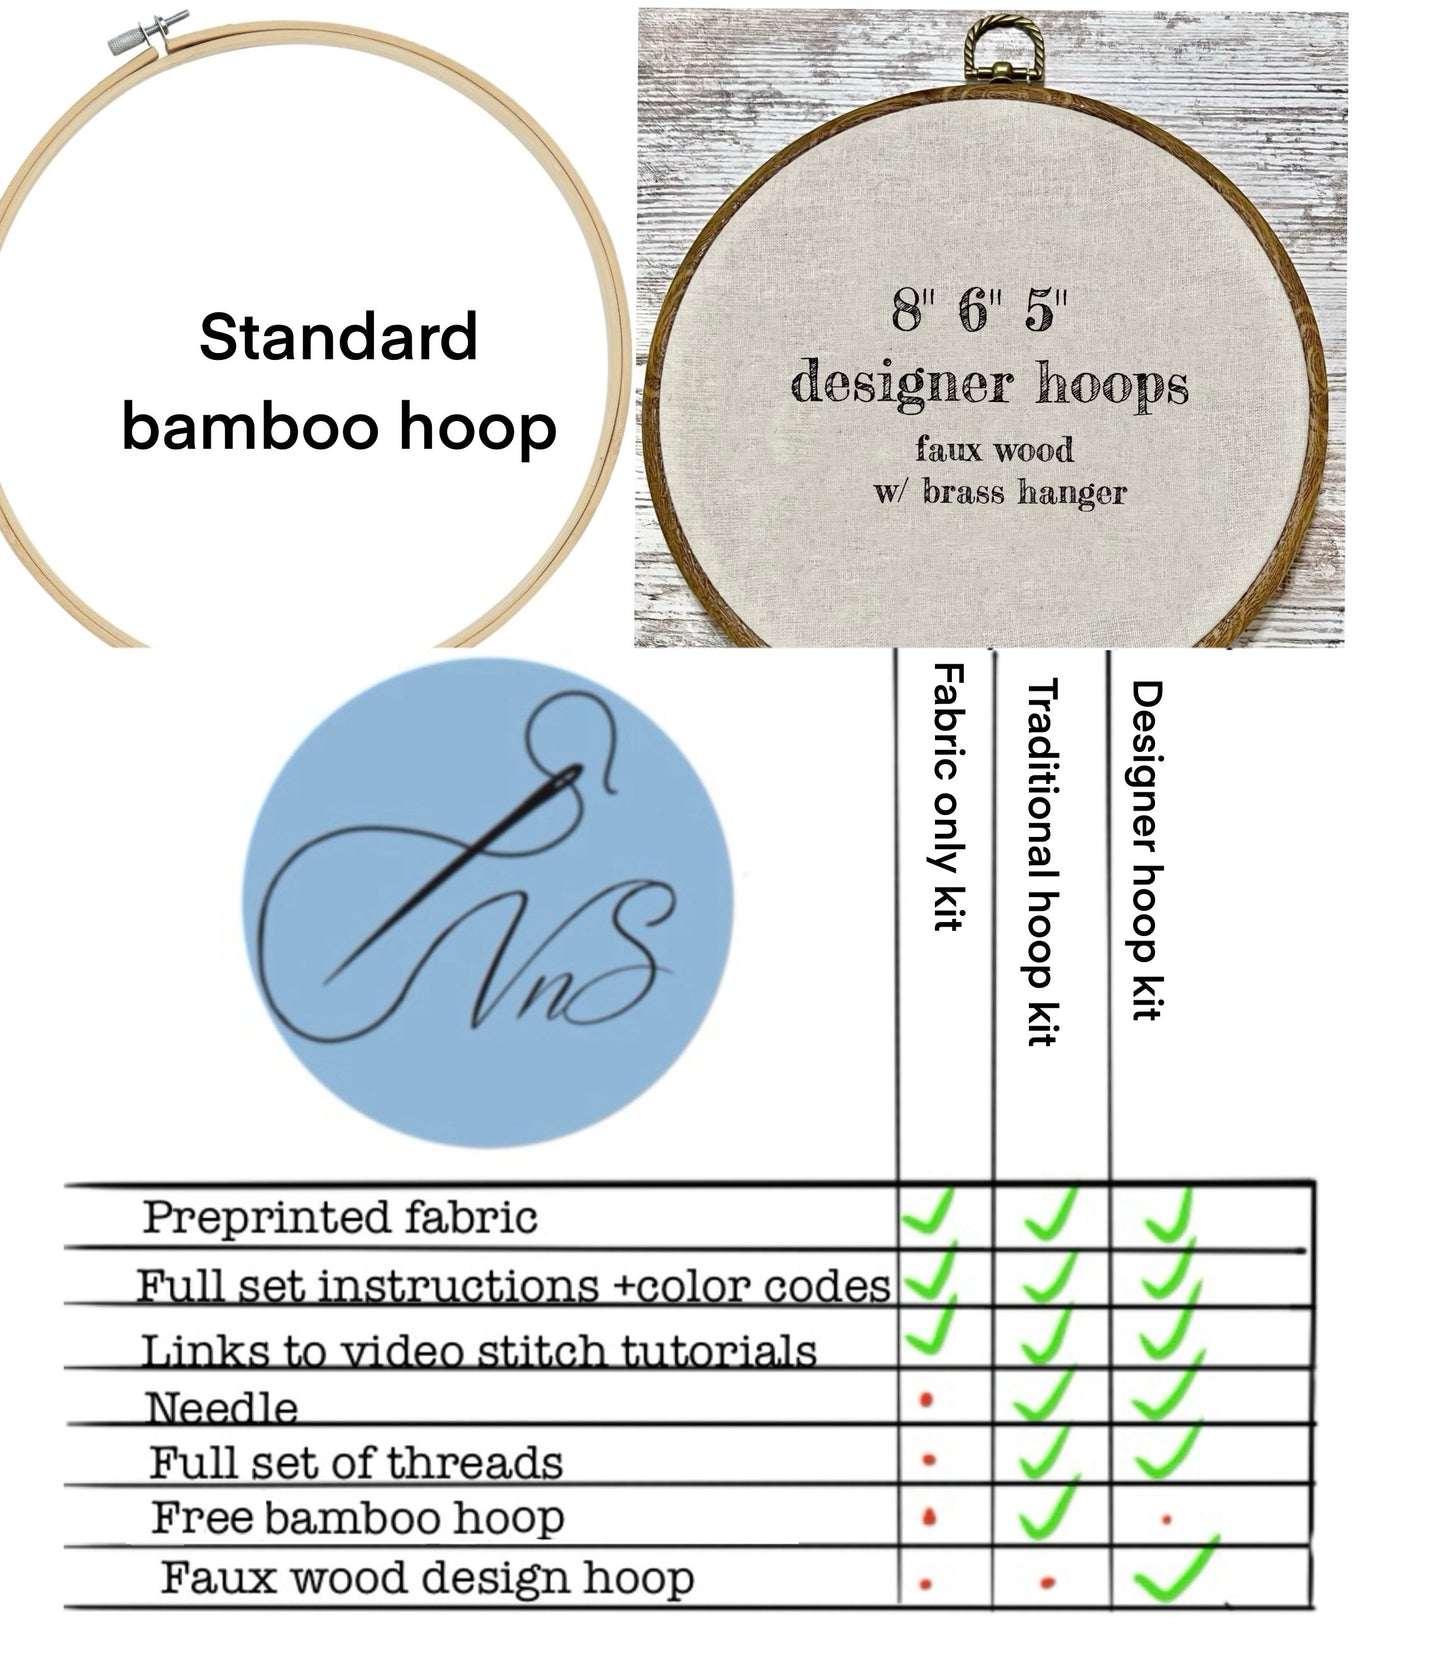 6" Bird and Teacup Floral 'Be Still' Embroidery Kit